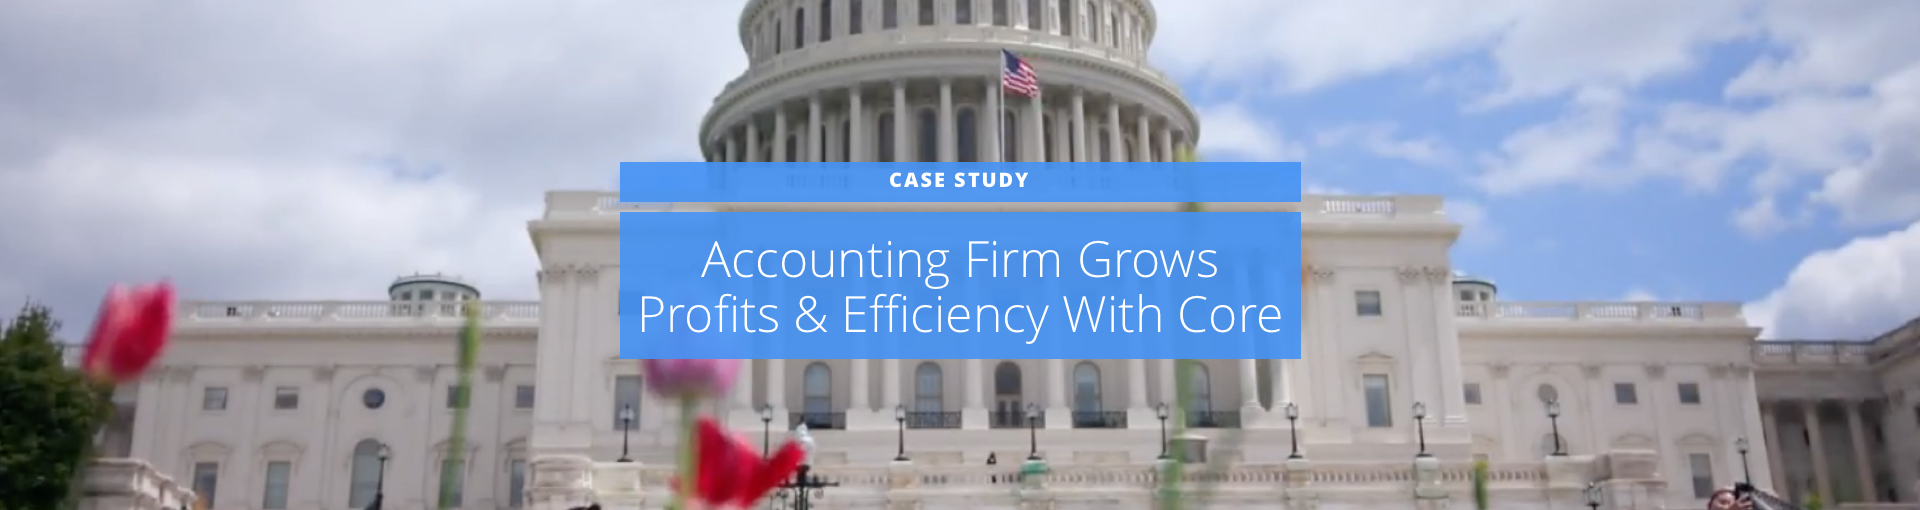 Case Study: Accounting Firm Grows Profits & Efficiency With Core Featured Image